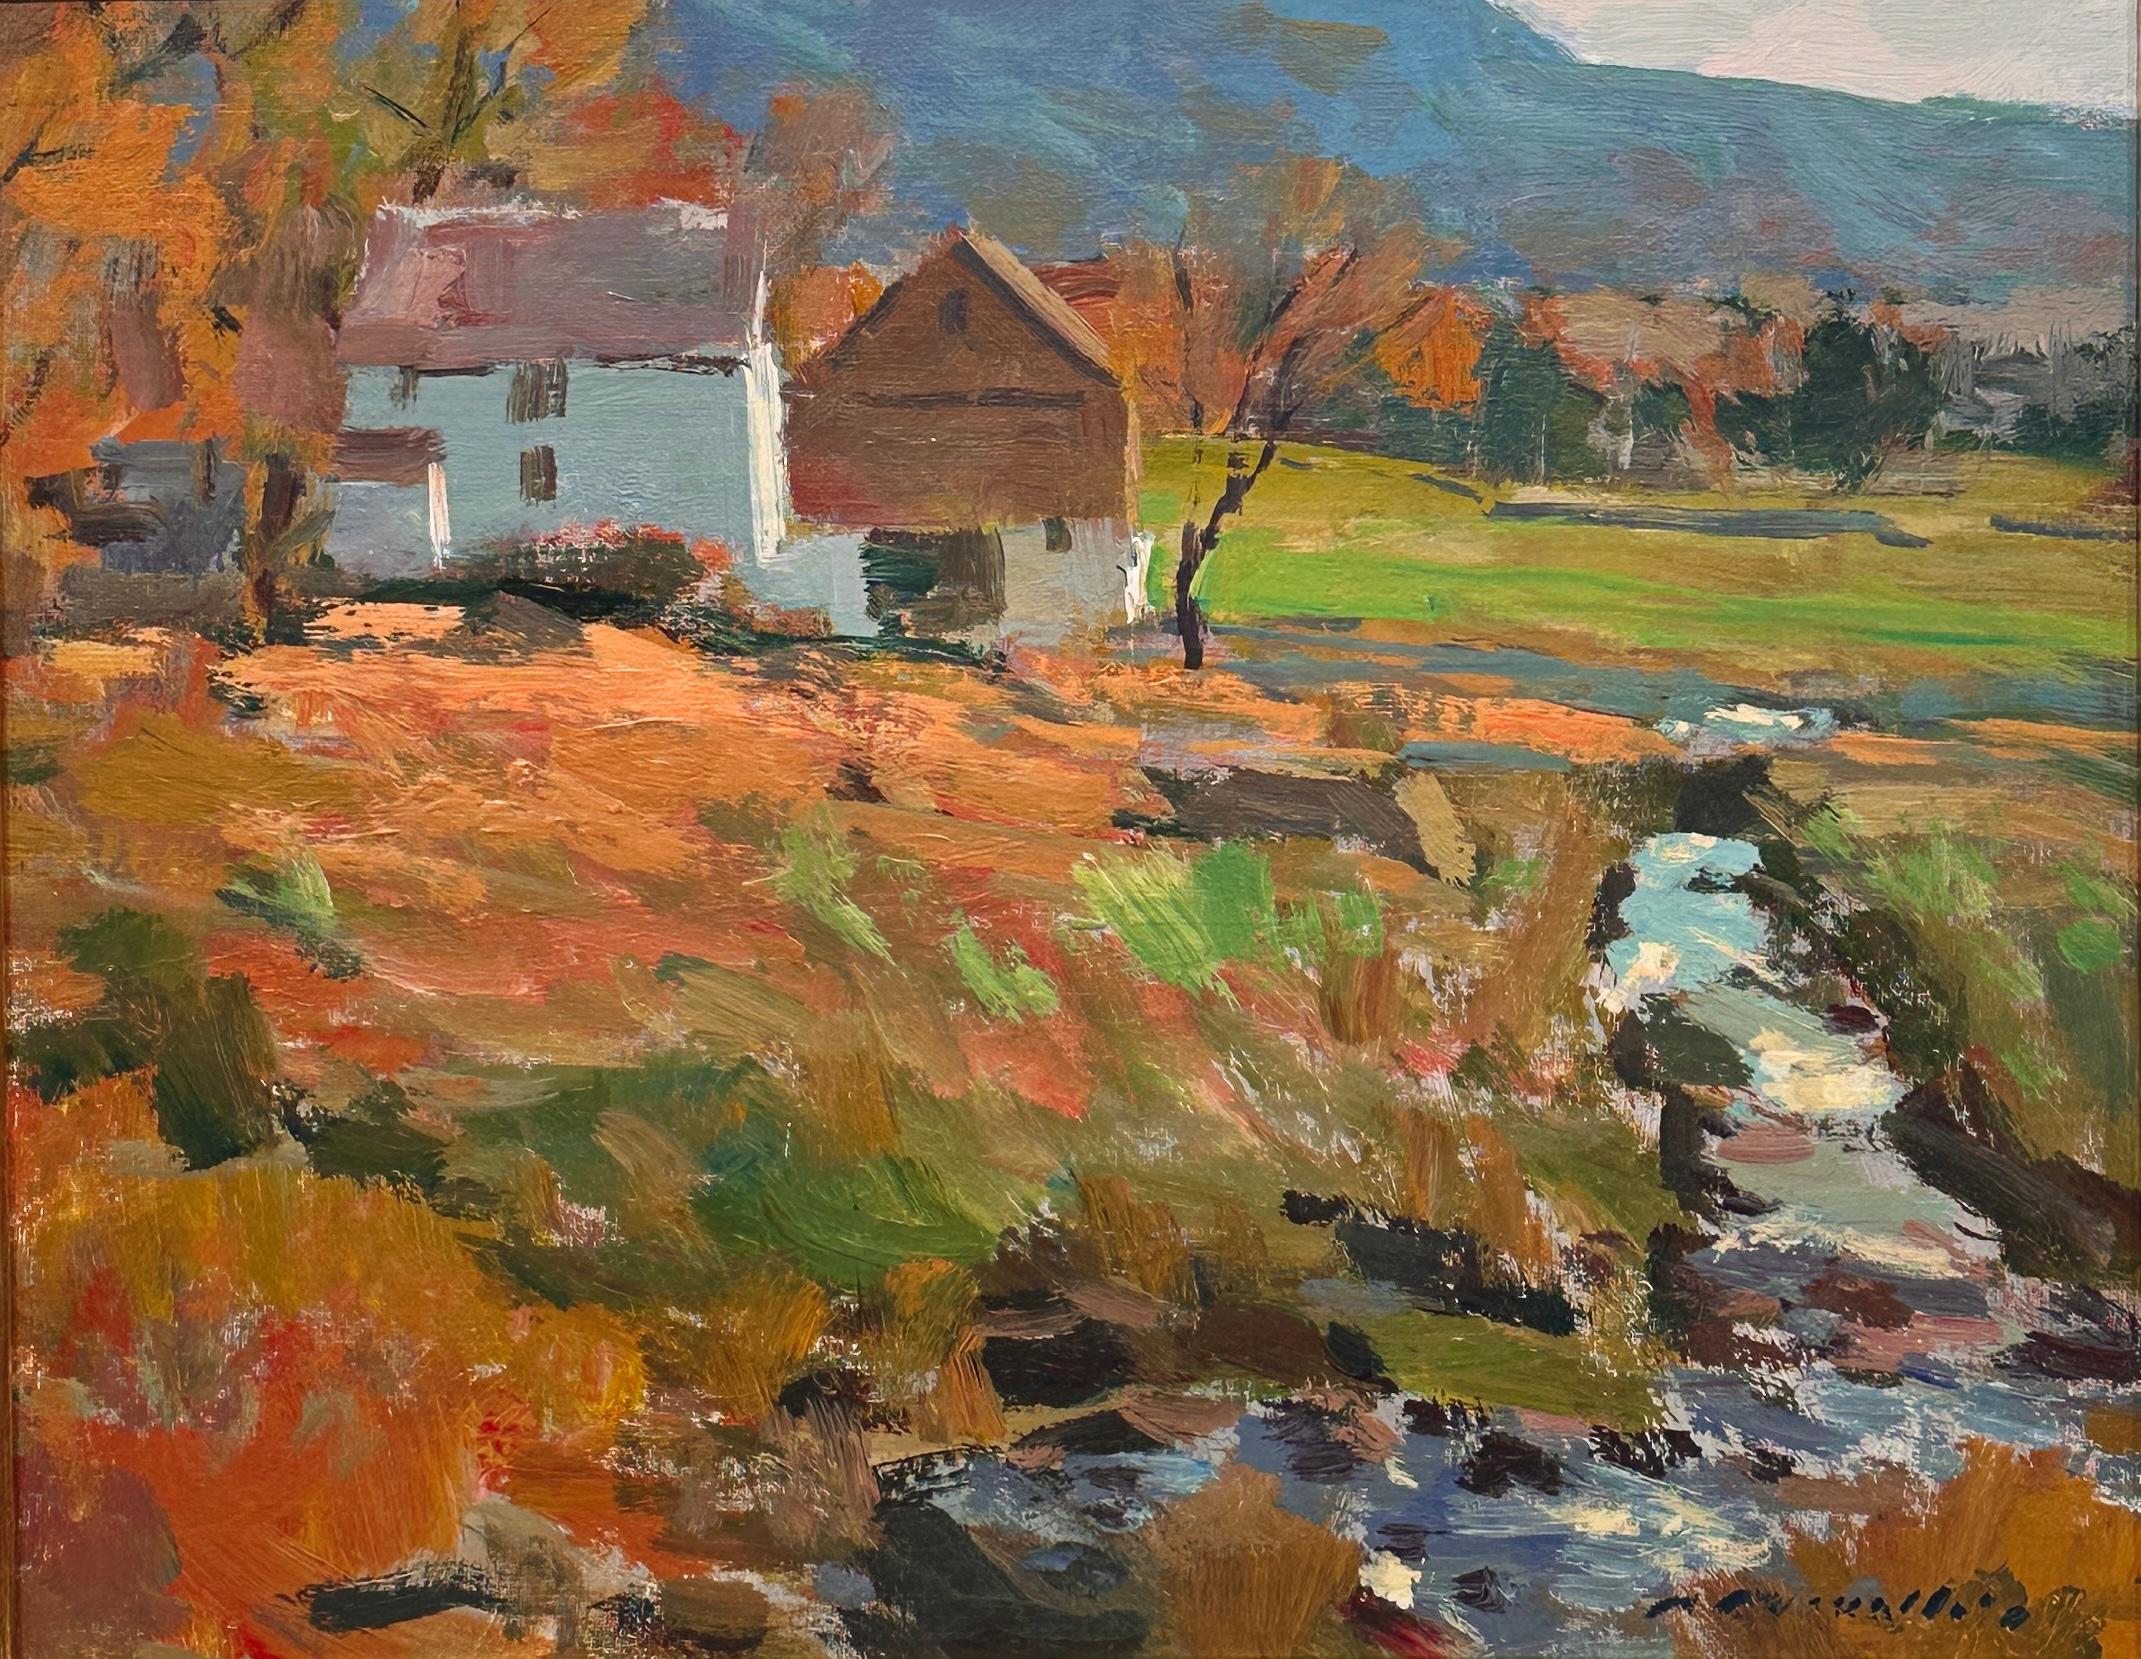 Charles Movalli (1945-2016)
Charles Movalli (1945–2016) had a BA from Clark University and a PhD from the University of Connecticut. He painted and wrote about art for over thirty years. He belonged to the North Shore Arts Association, the Rockport